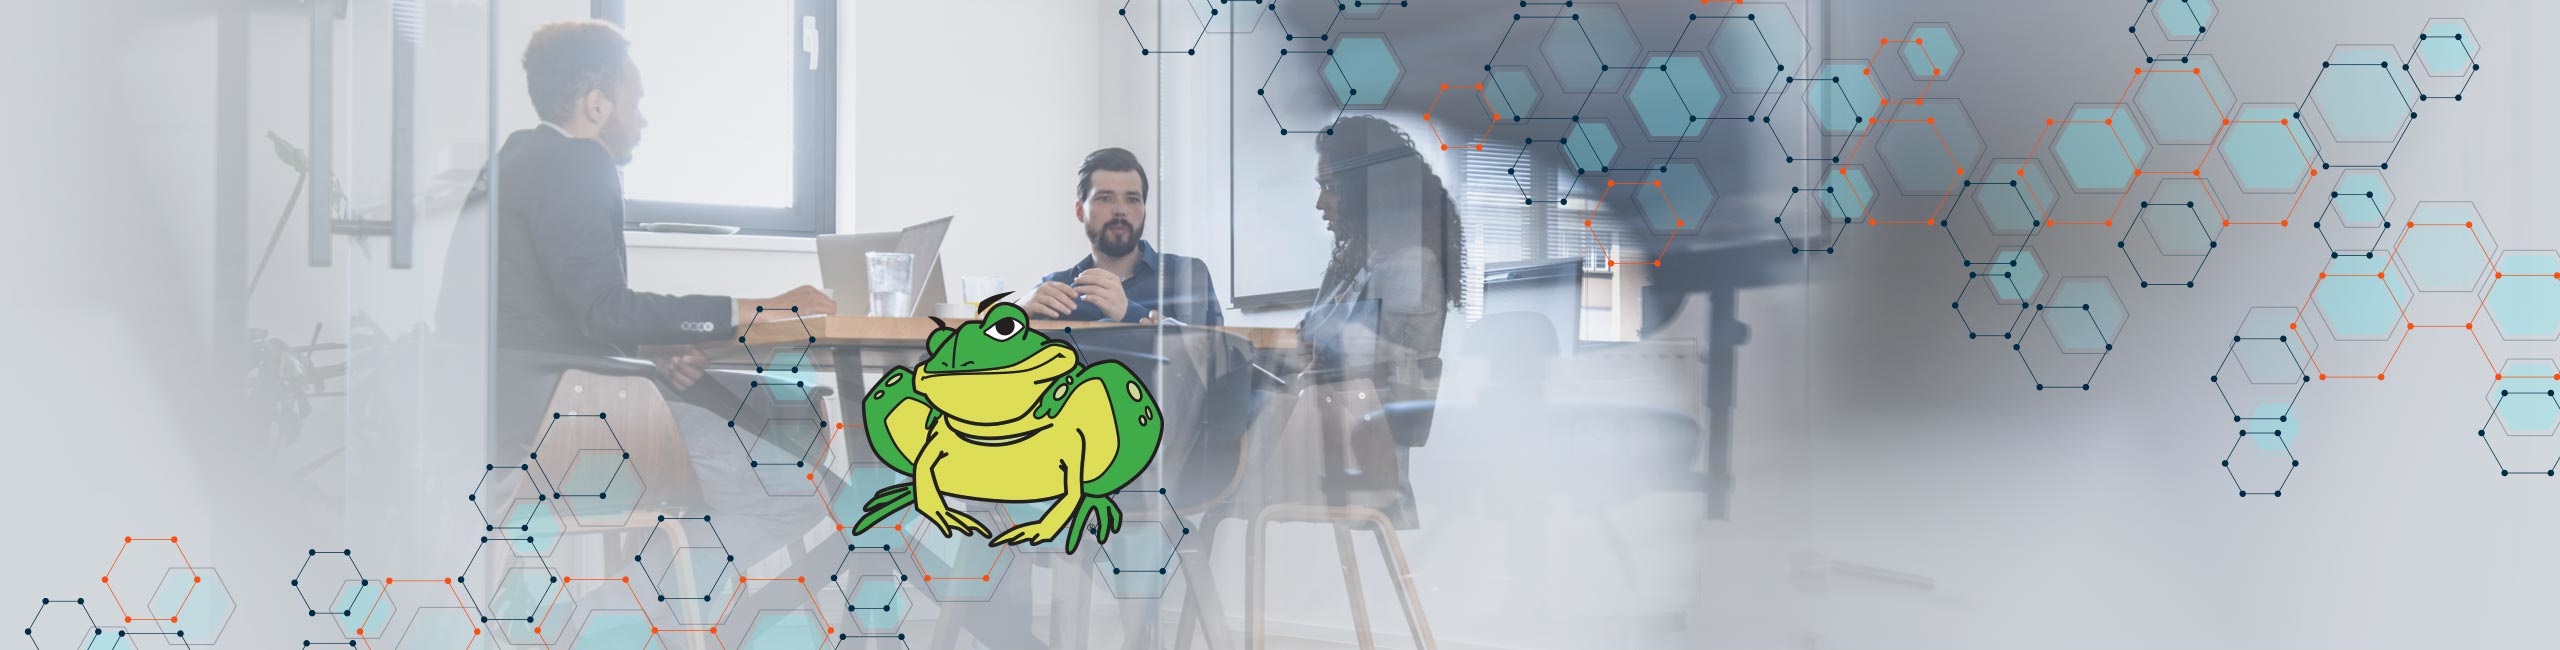 toad for oracle pricing